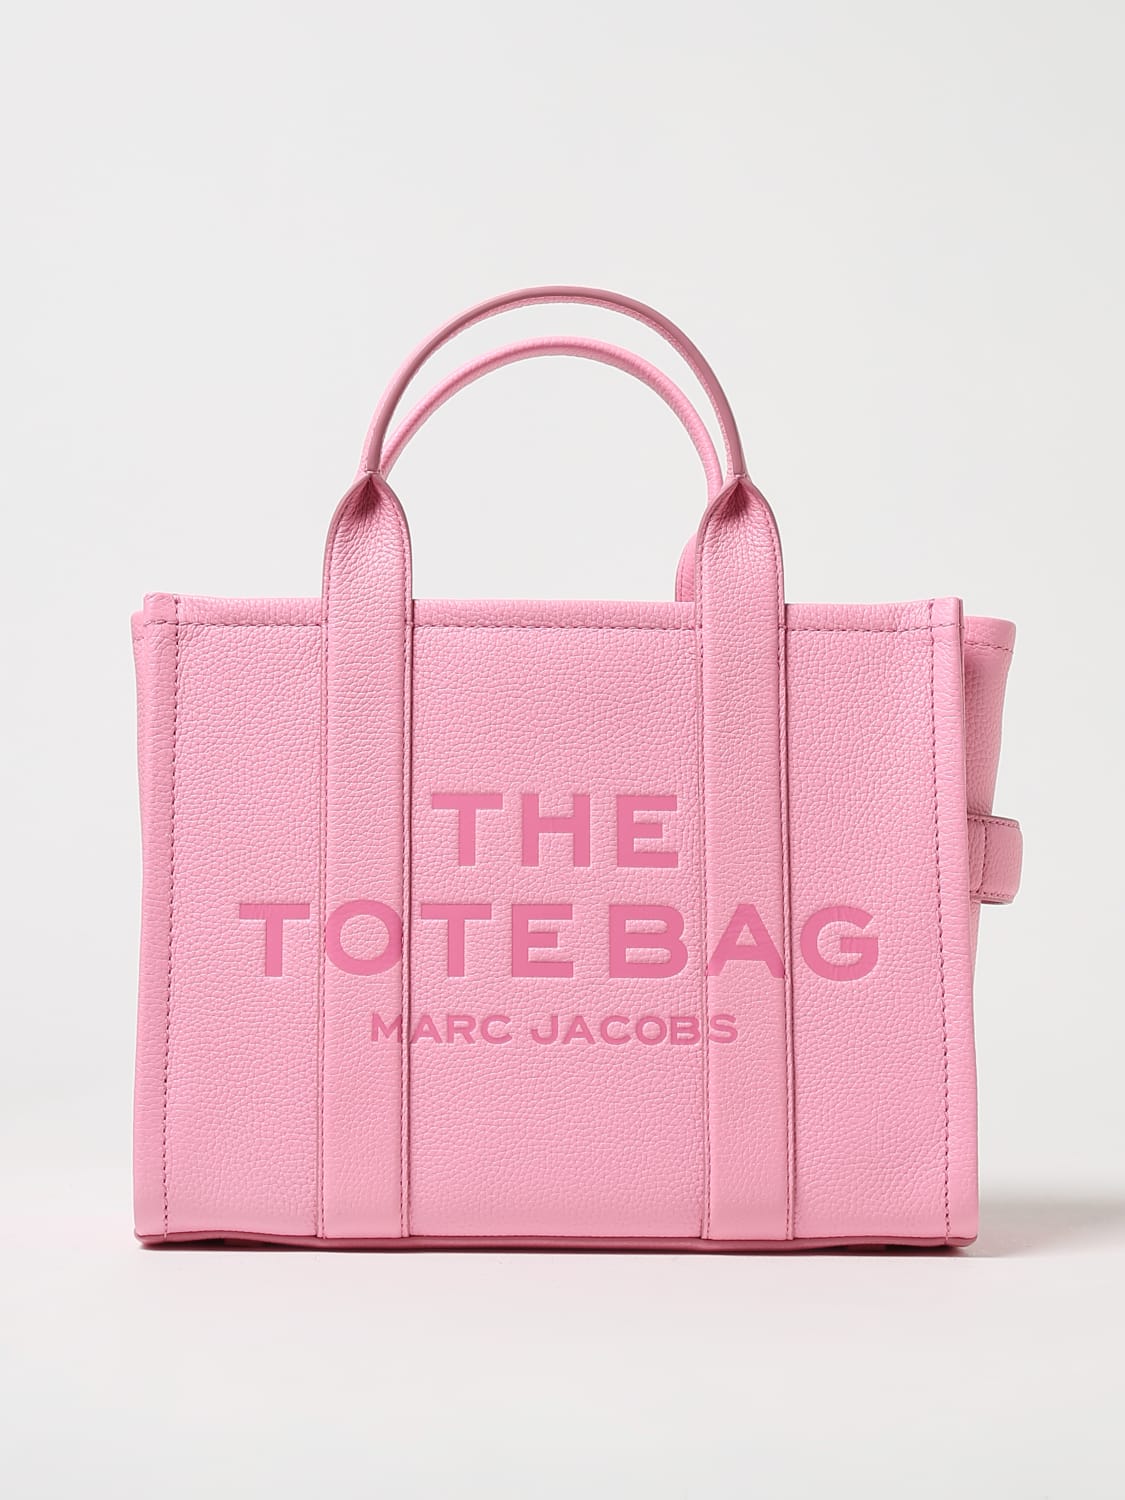 Marc Jacobs Woman's Tote Bag